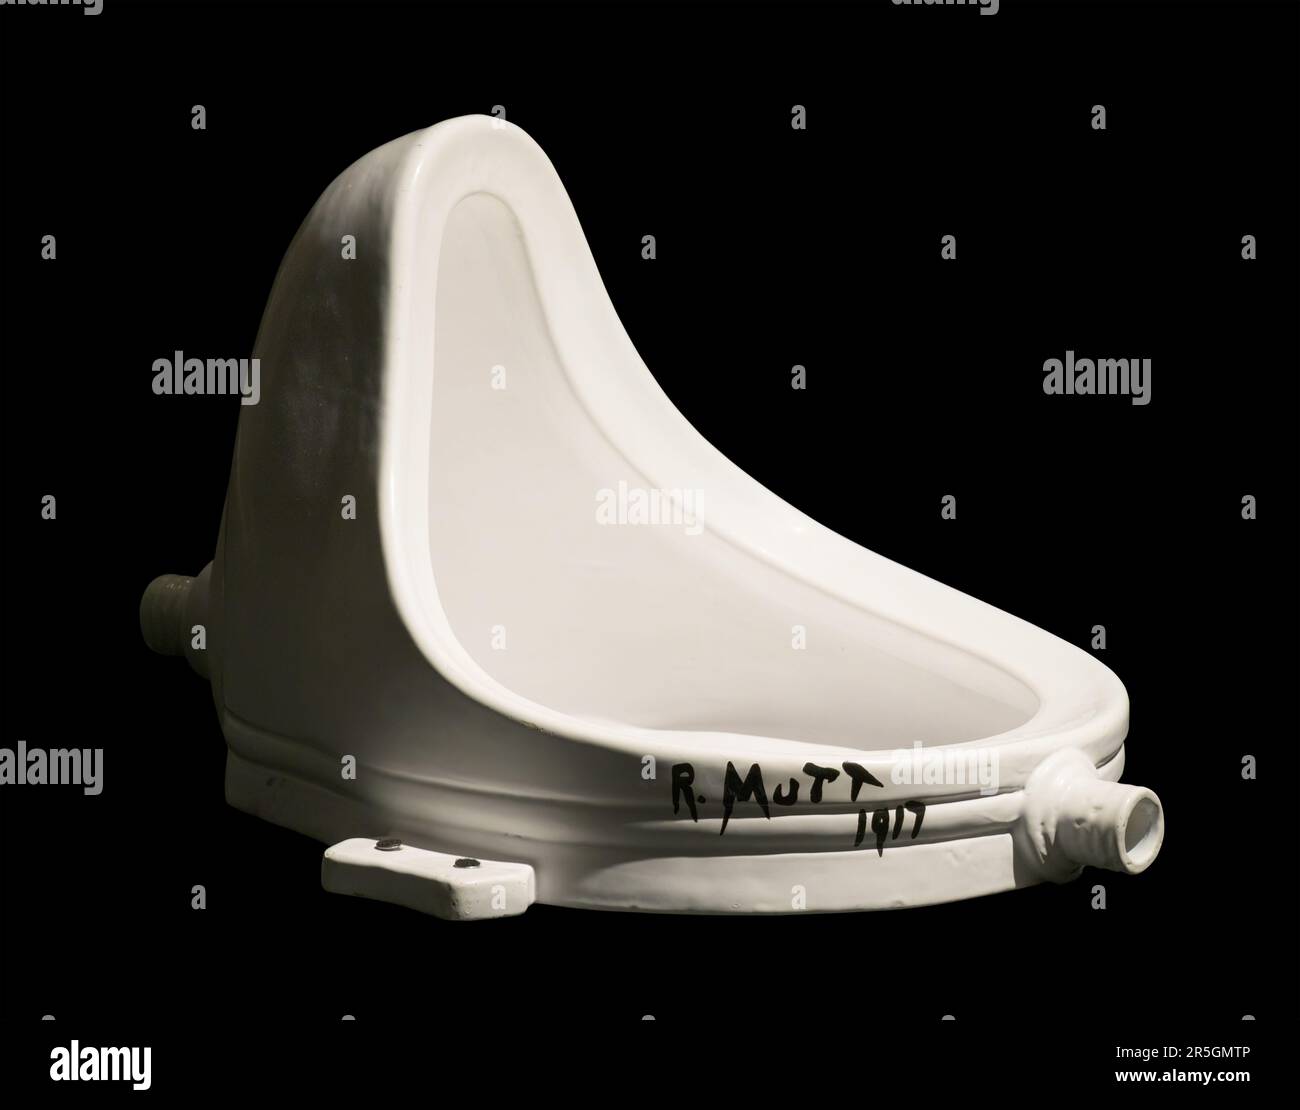 Fountain is a readymade sculpture by Marcel Duchamp in 1917, consisting of a porcelain urinal Stock Photo